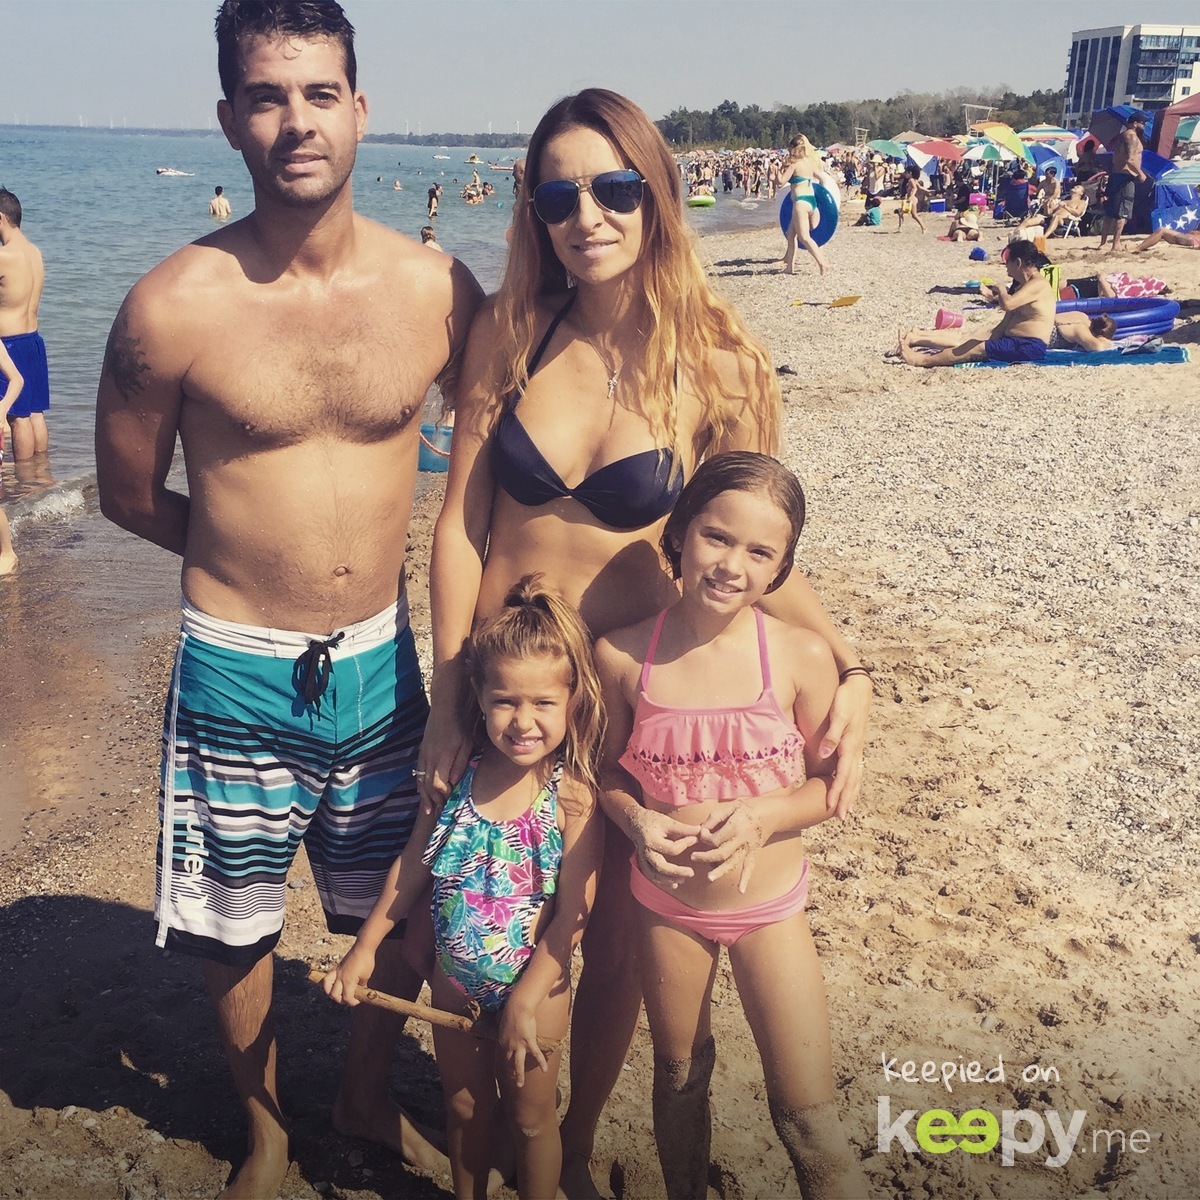 Beach day at grand bend 2017 » Keepy.me